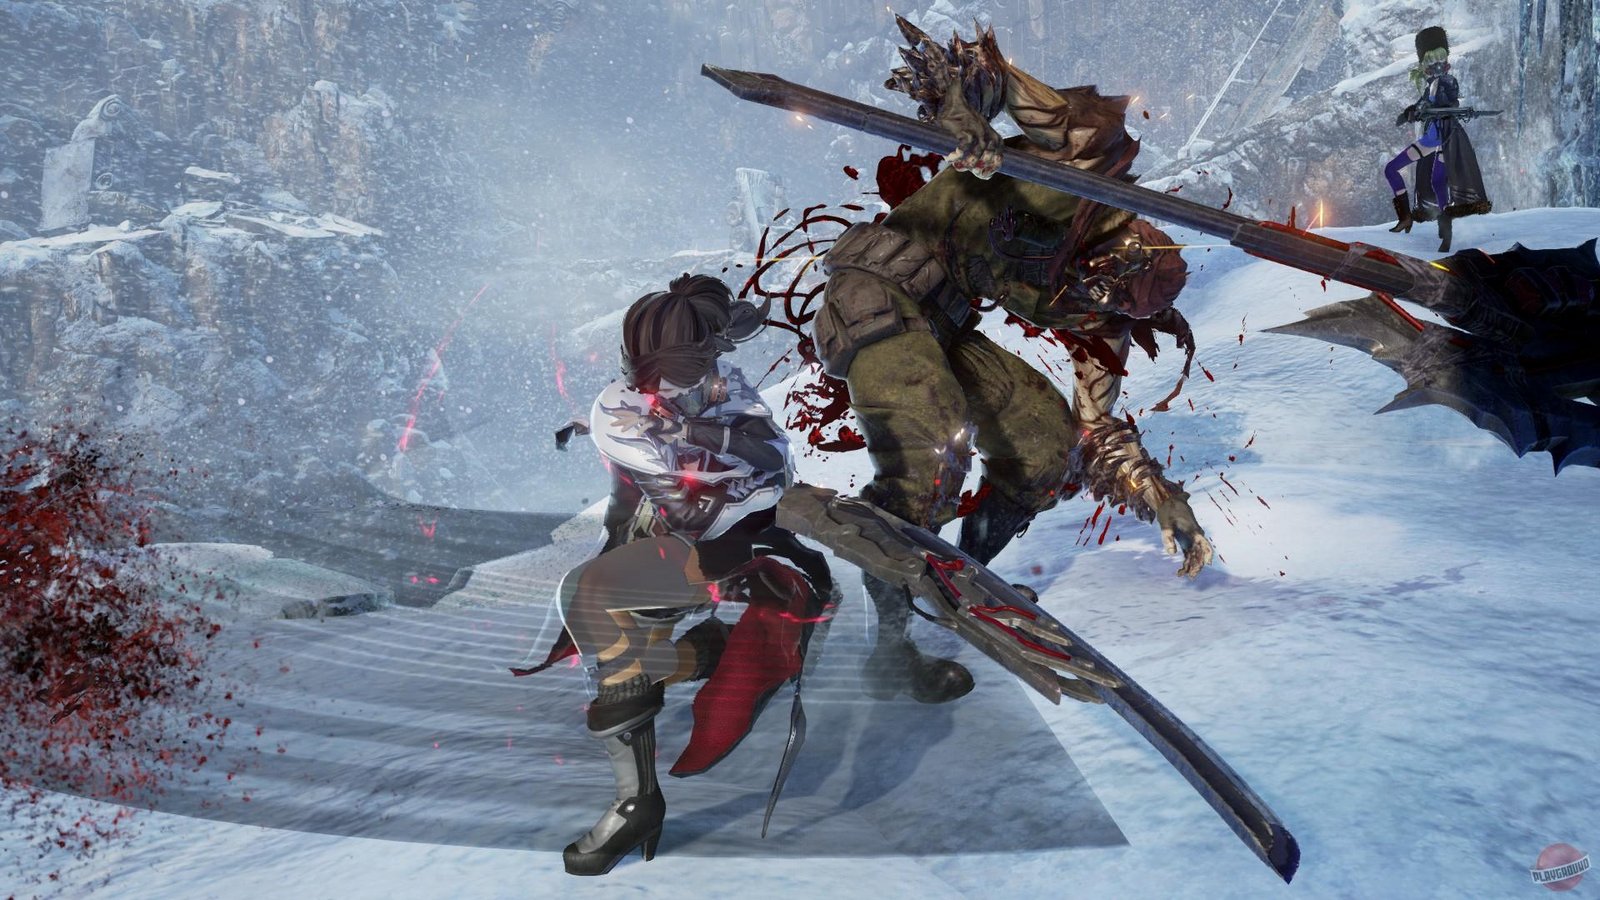 Code Vein: Lord of Thunder